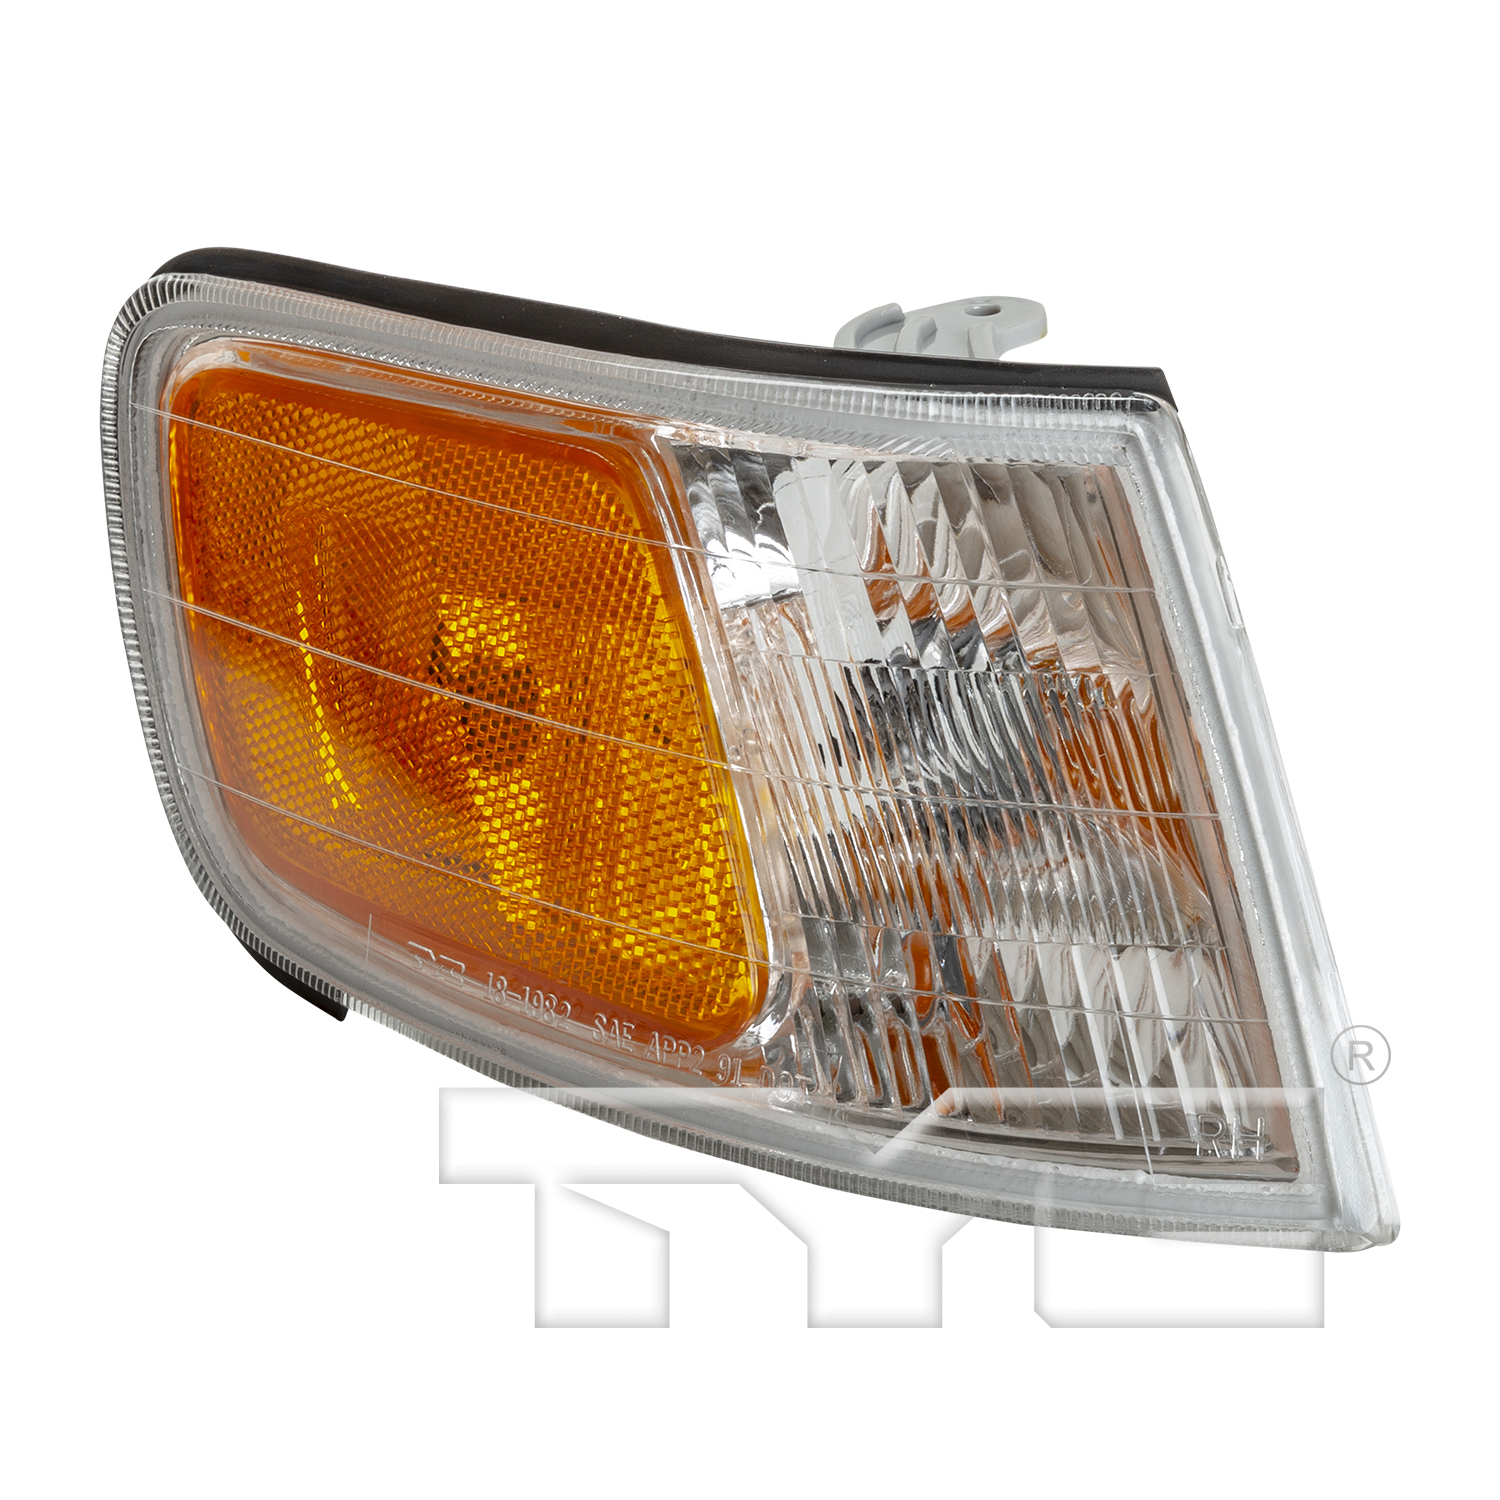 Aftermarket LAMPS for HONDA - ACCORD, ACCORD,94-97,RT Front marker lamp assy